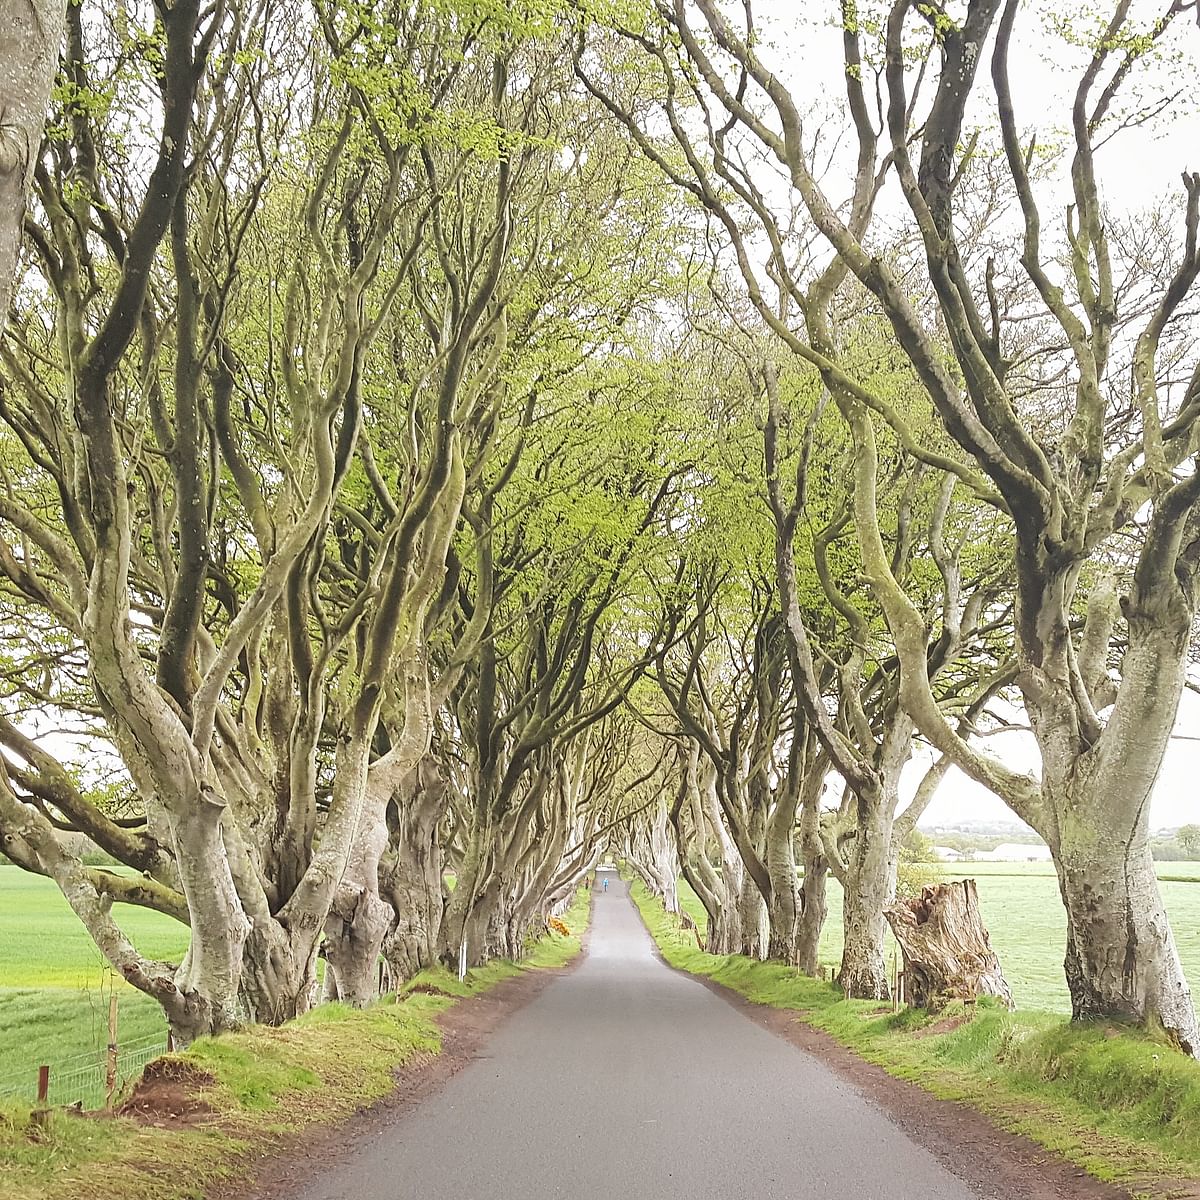 Game of Thrones, the iconic TV show, has ensured the beautiful coast of Northern Island is a tourist destination.